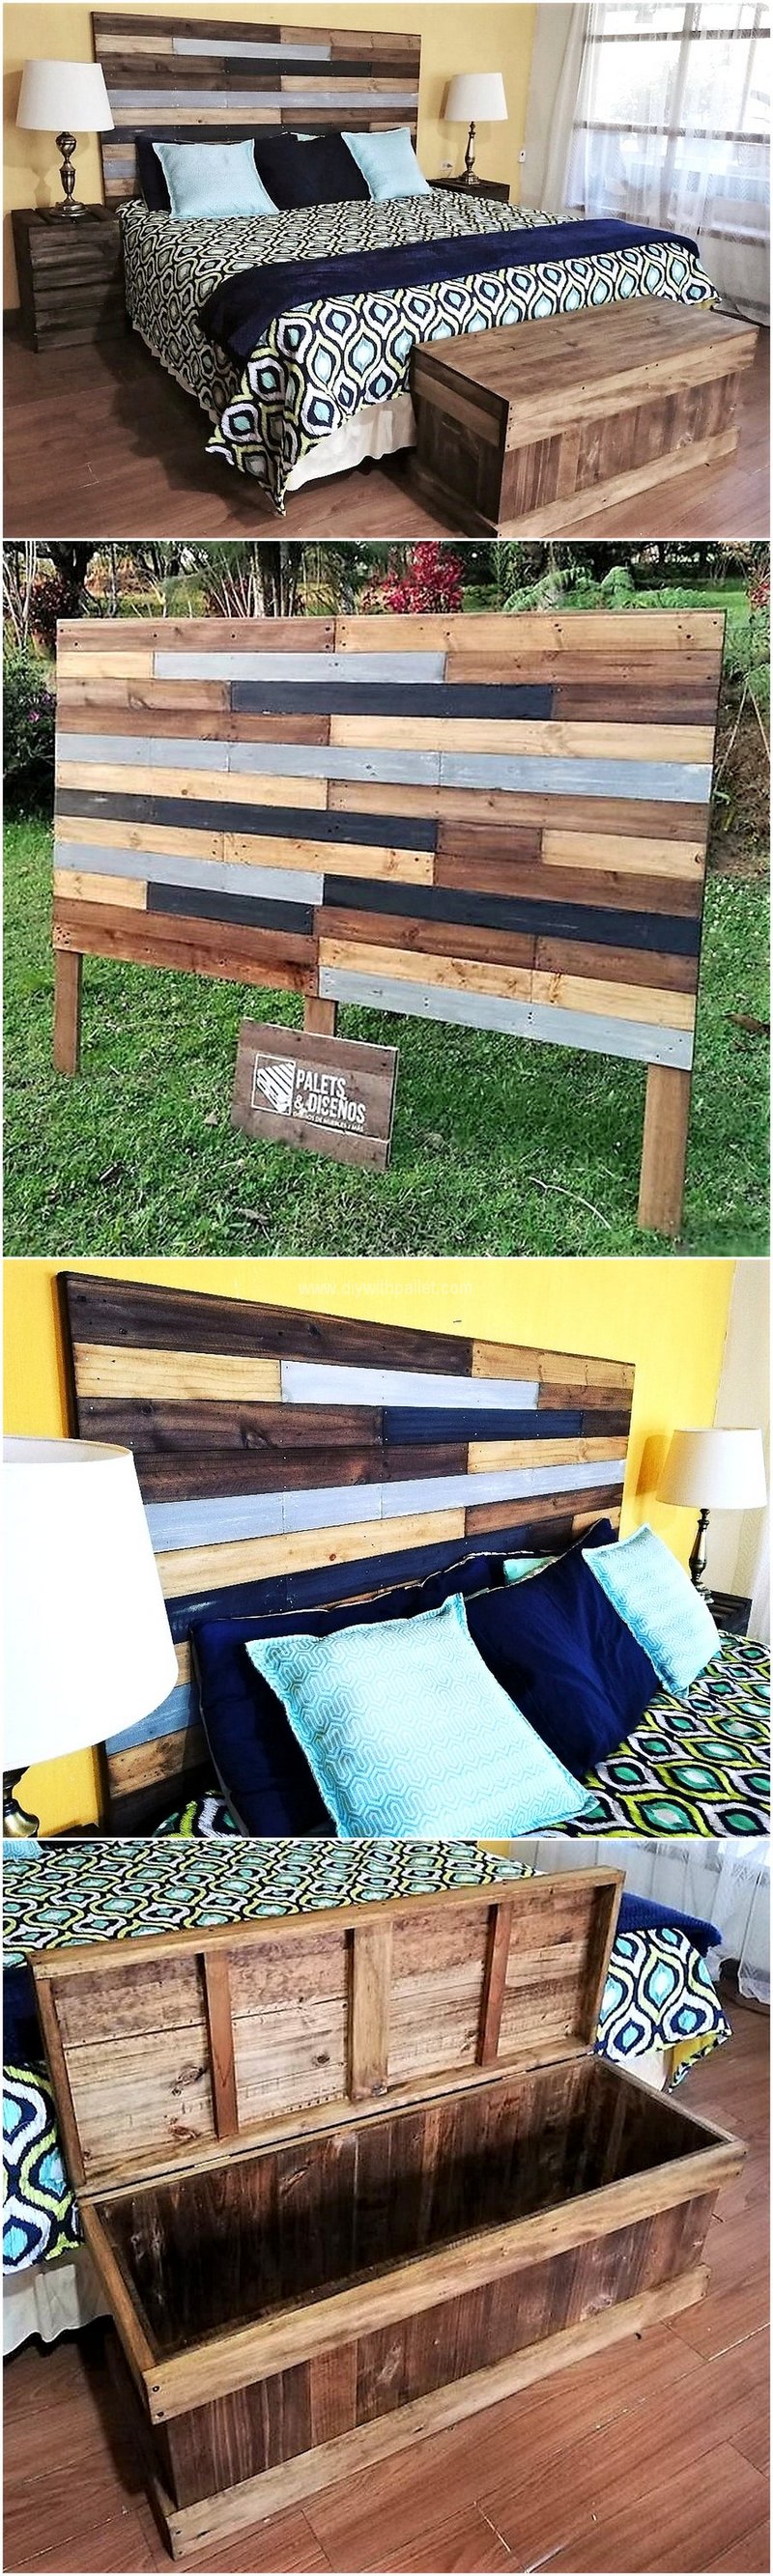 pallet bed headboard and trunk